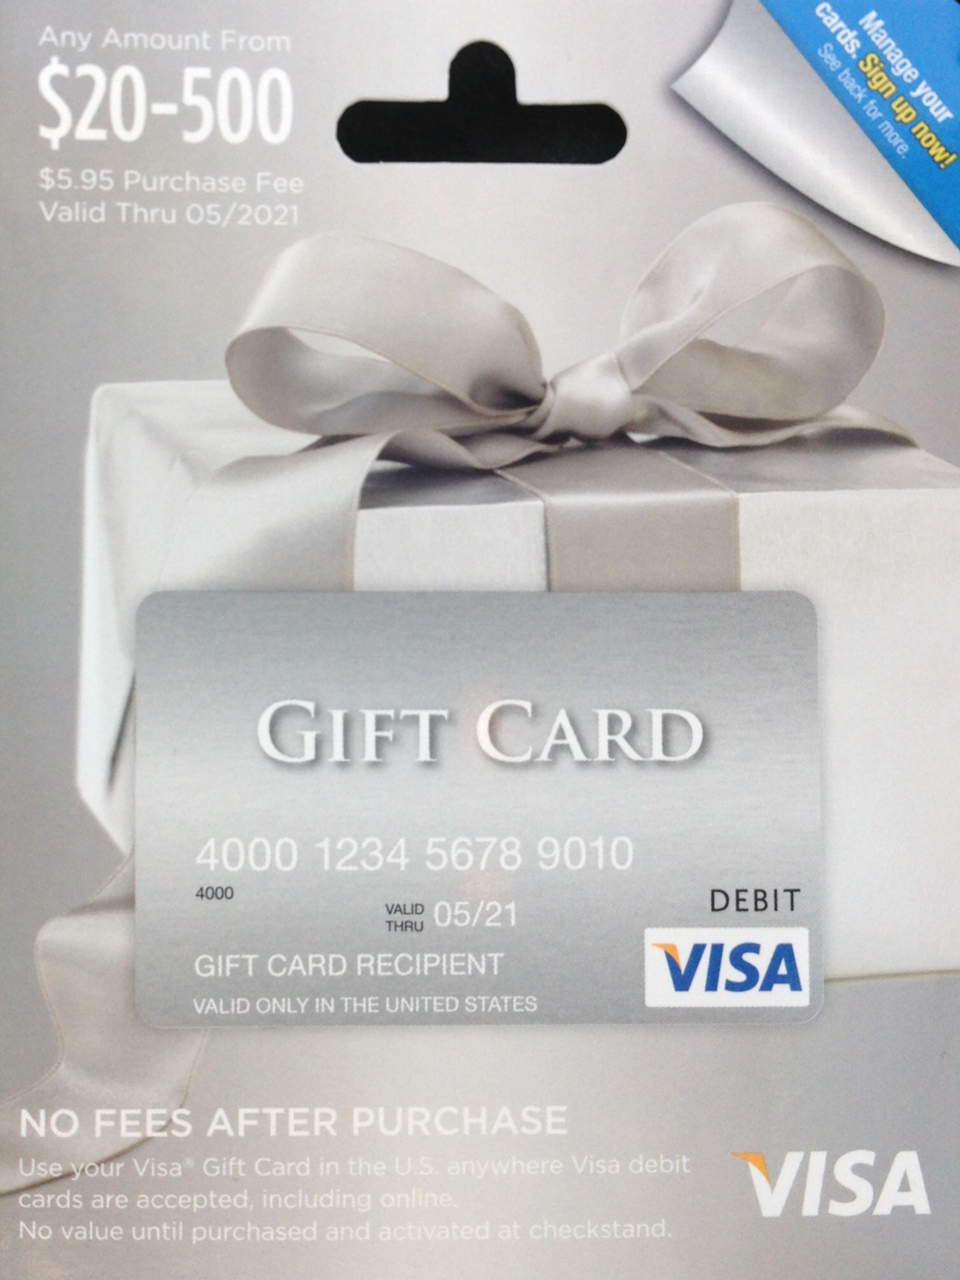 AmEx Gift Card Ways to Save Money when Shopping Part 2